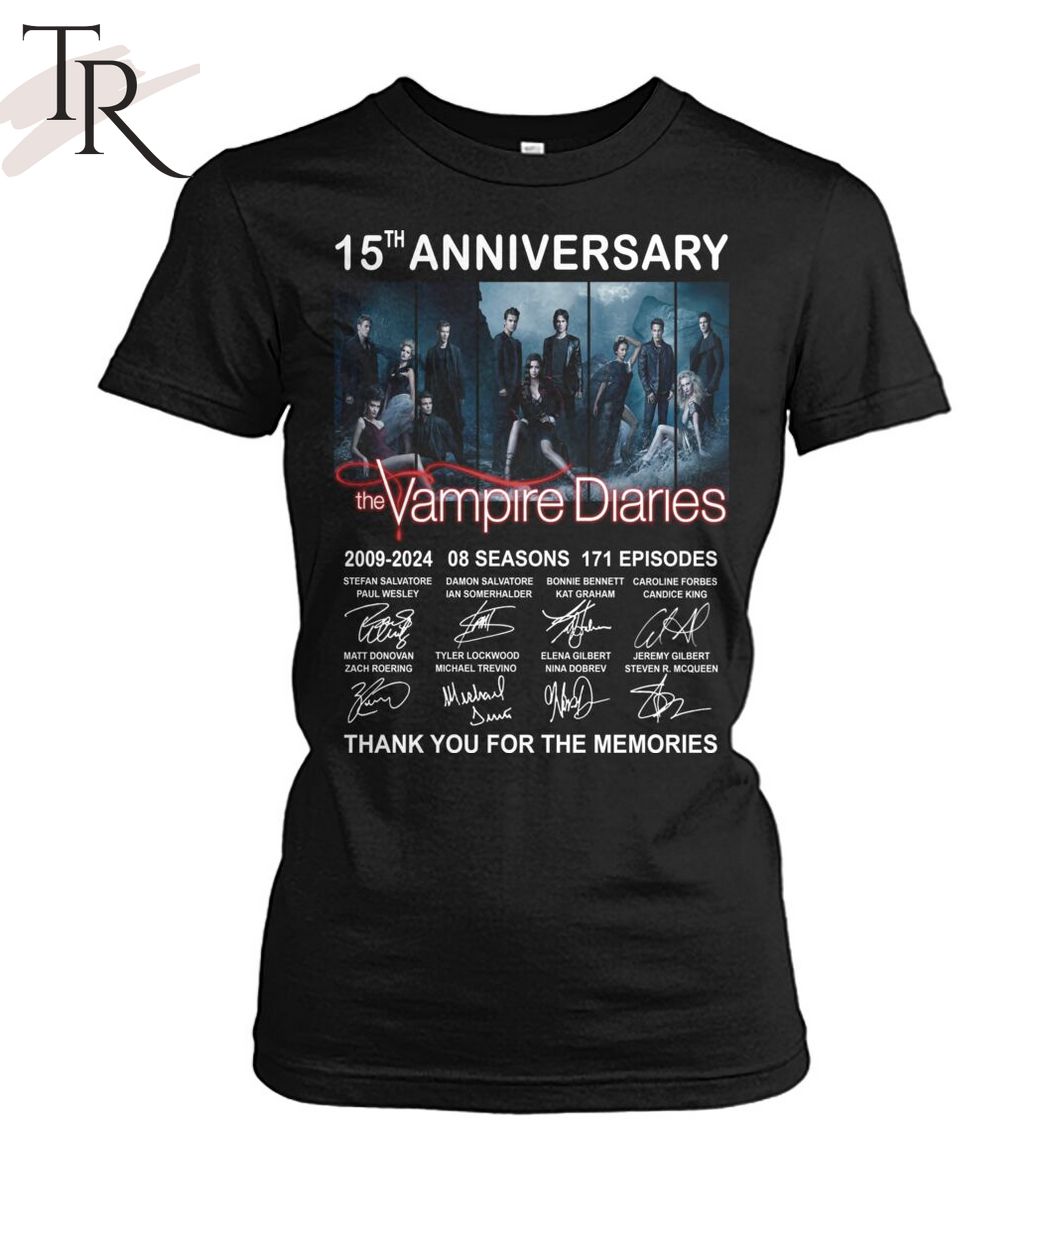 15th Anniversary The Vampire Diaries 2009-2024 08 Seasons 171 Episodes Thank You For The Memories T-Shirt